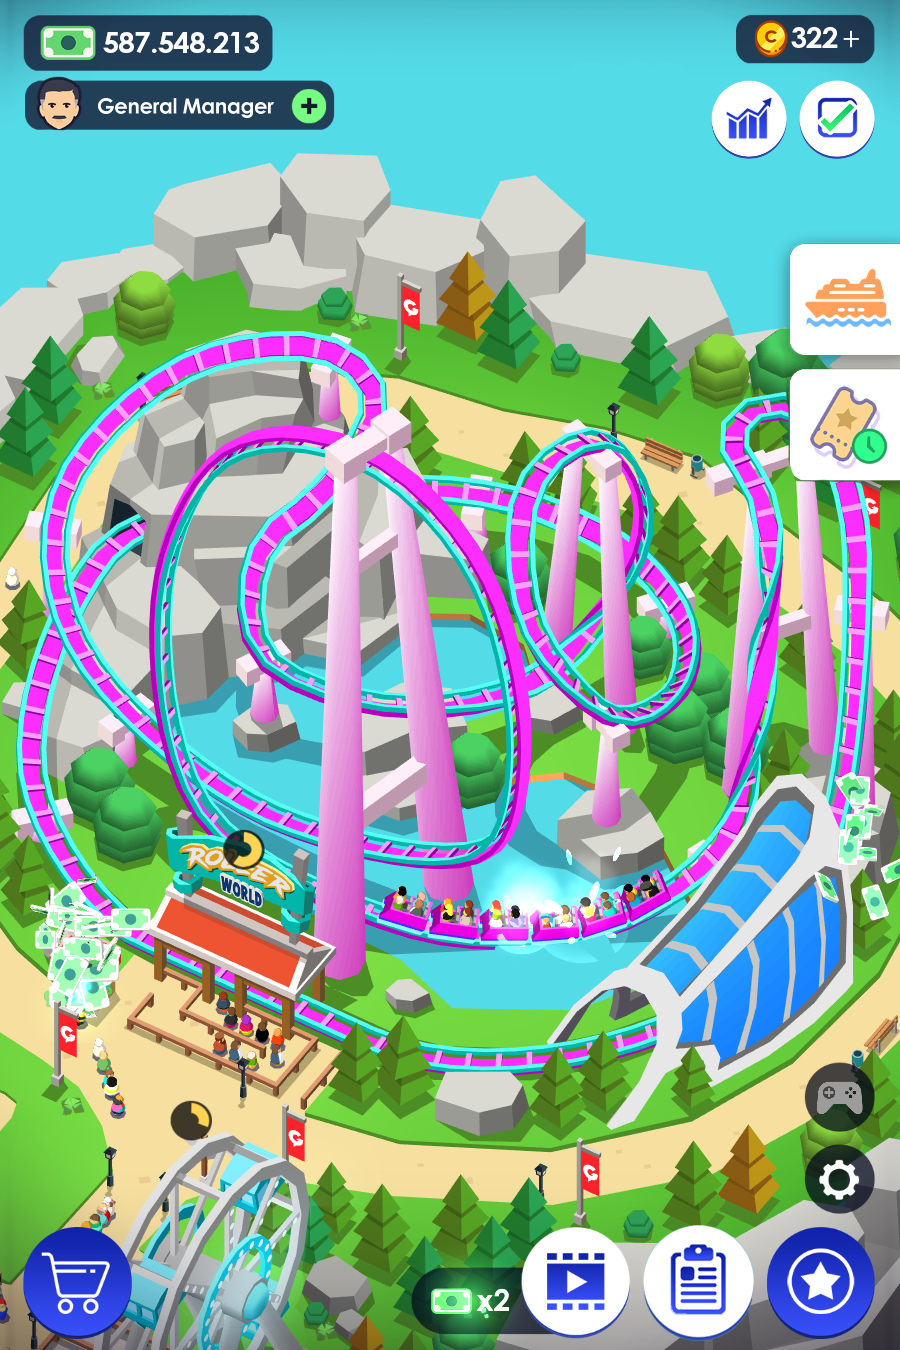 Screenshot 1 of Idle Theme Park Tycoon - Recreation Game 5.2.2